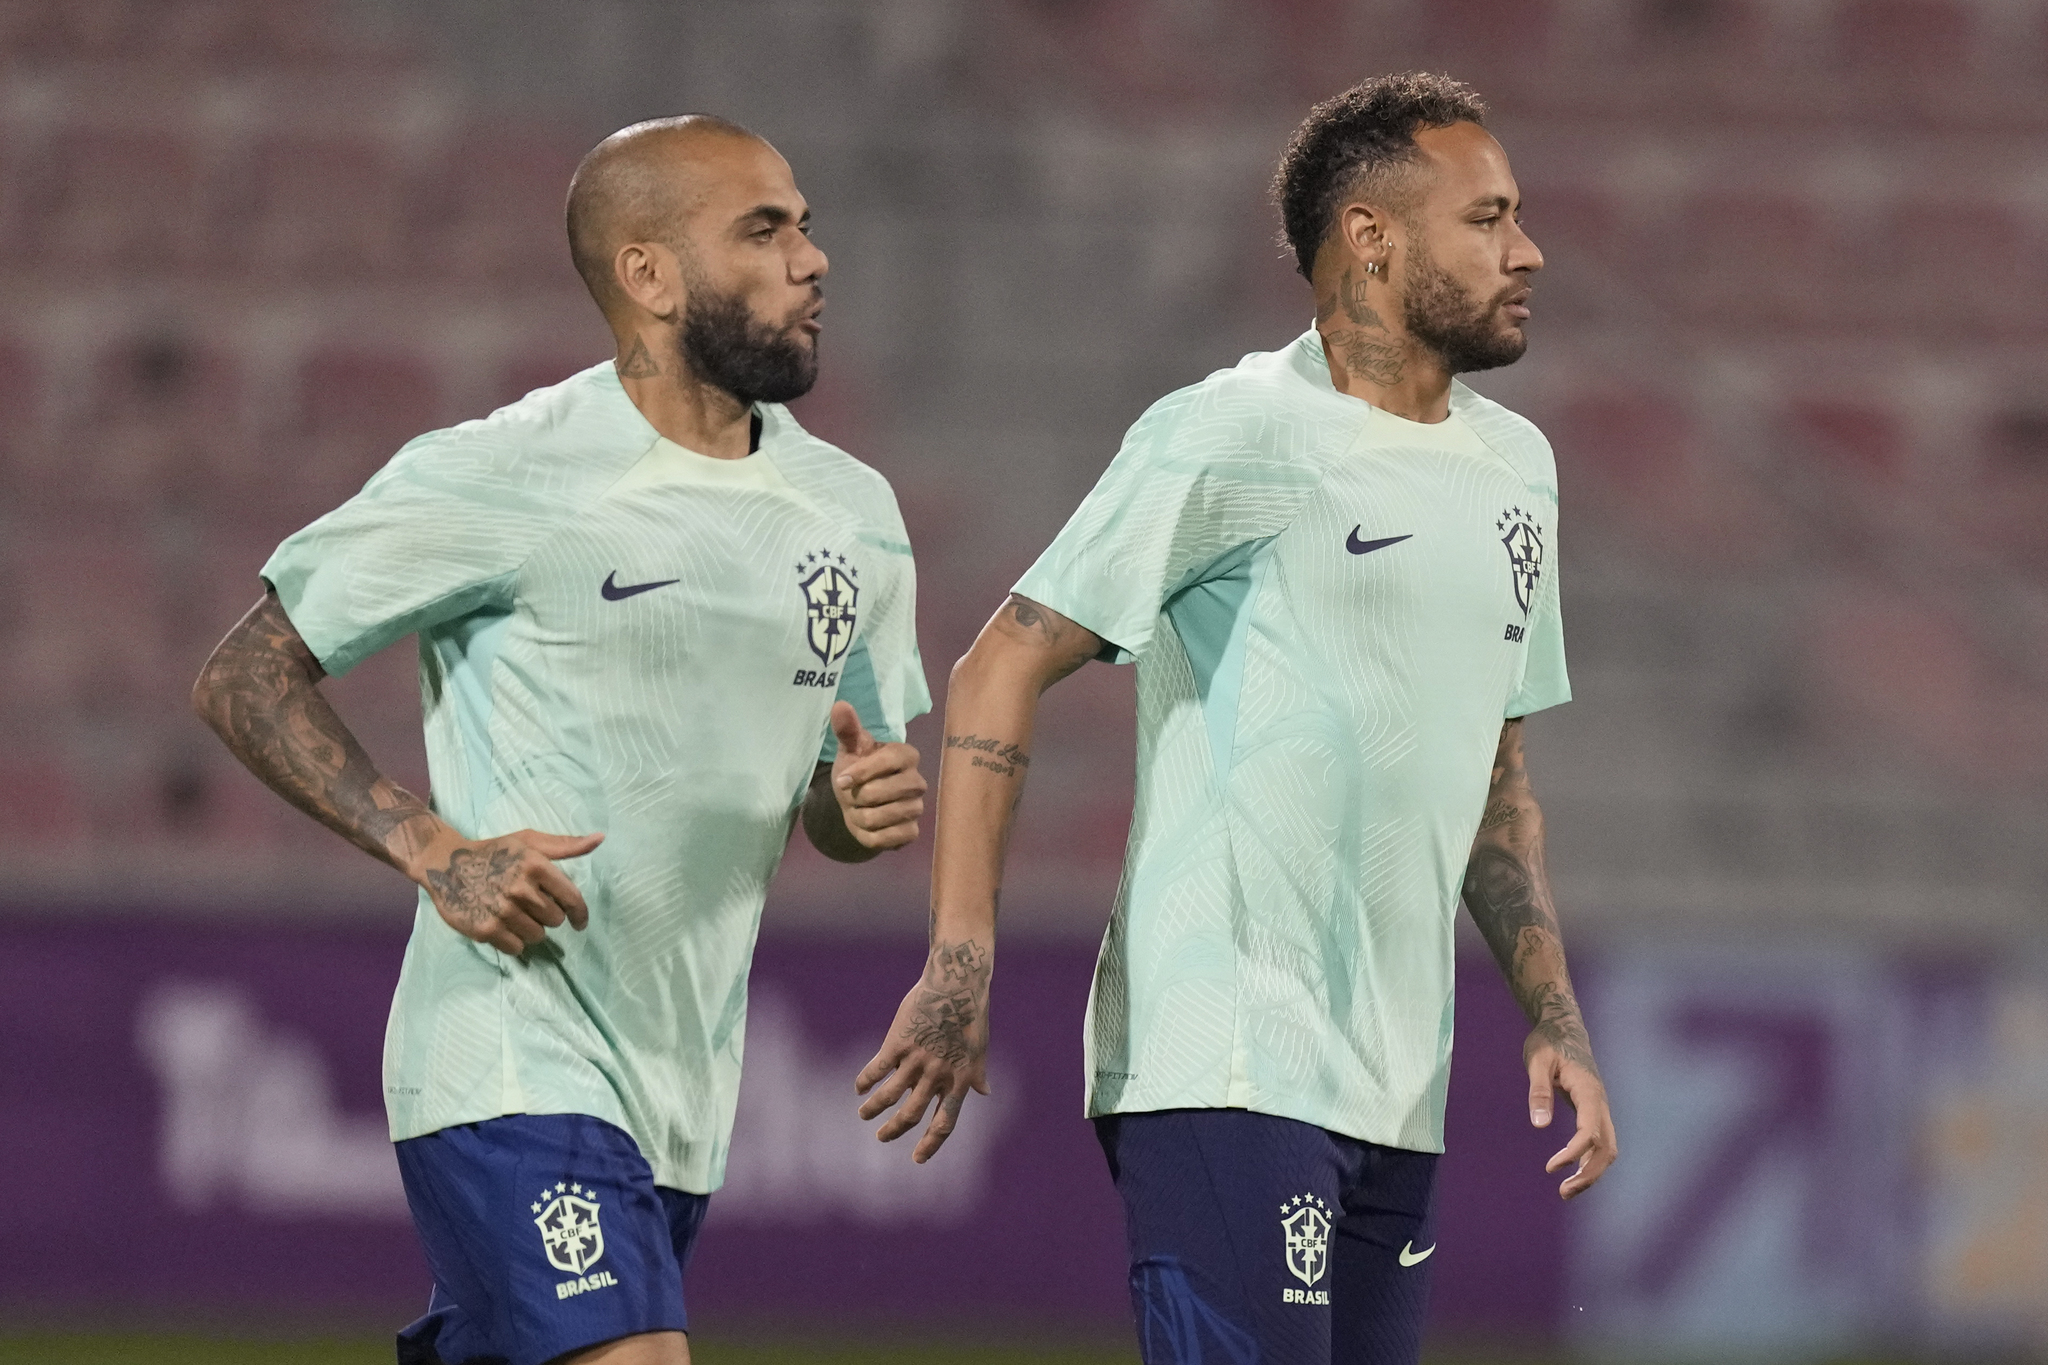 Brazil's Neymar, right, and  lt;HIT gt;Dani lt;/HIT gt;  lt;HIT gt;Alves lt;/HIT gt; attend a training session at the Grand Hamad stadium, in Doha, Qatar, Wednesday, Nov. 23, 2022. Brazil will play their first match in the World Cup against Serbia on Nov. 24. (AP Photo/Andre Penner)